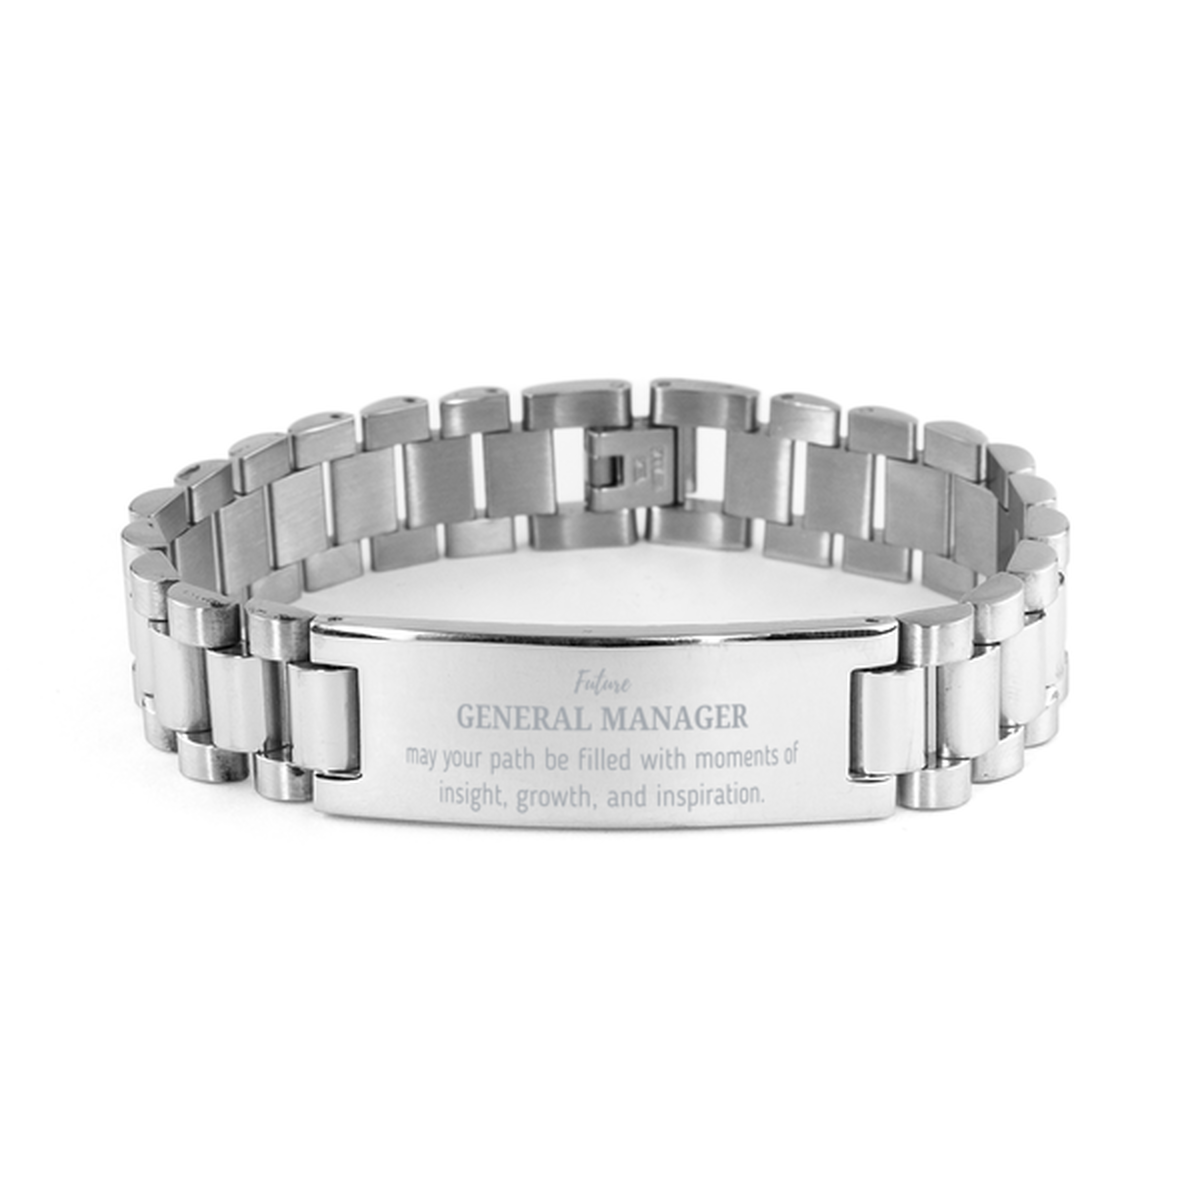 Future General Manager Gifts, May your path be filled with moments of insight, Graduation Gifts for New General Manager, Christmas Unique Ladder Stainless Steel Bracelet For Men, Women, Friends